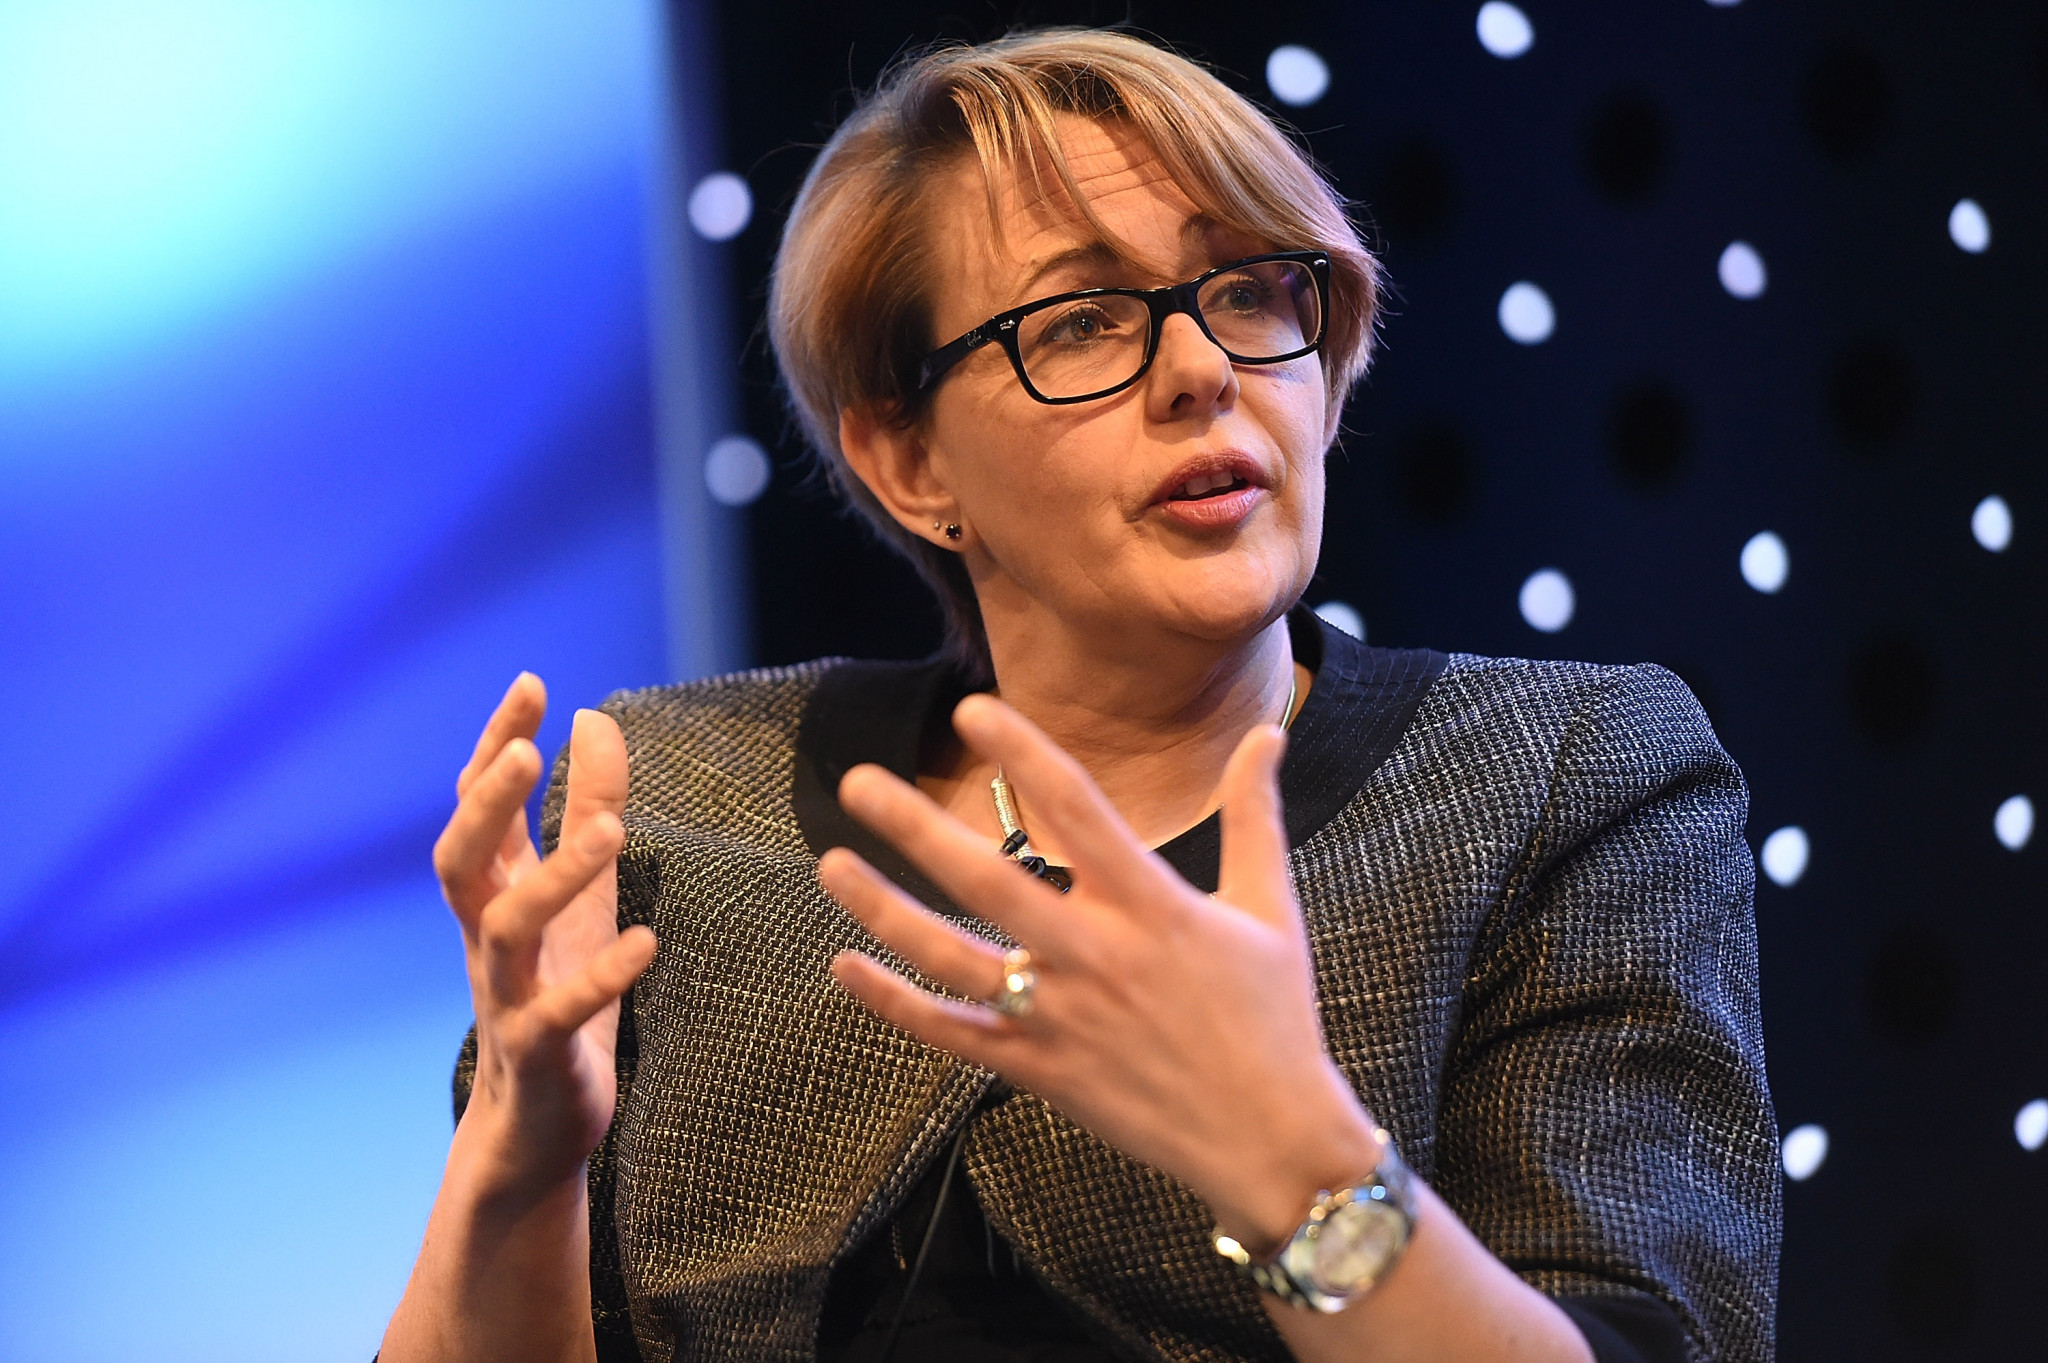 Eleven-time Paralympic gold medallist Baroness Tanni Grey-Thompson will appear at the hearing ©Getty Images